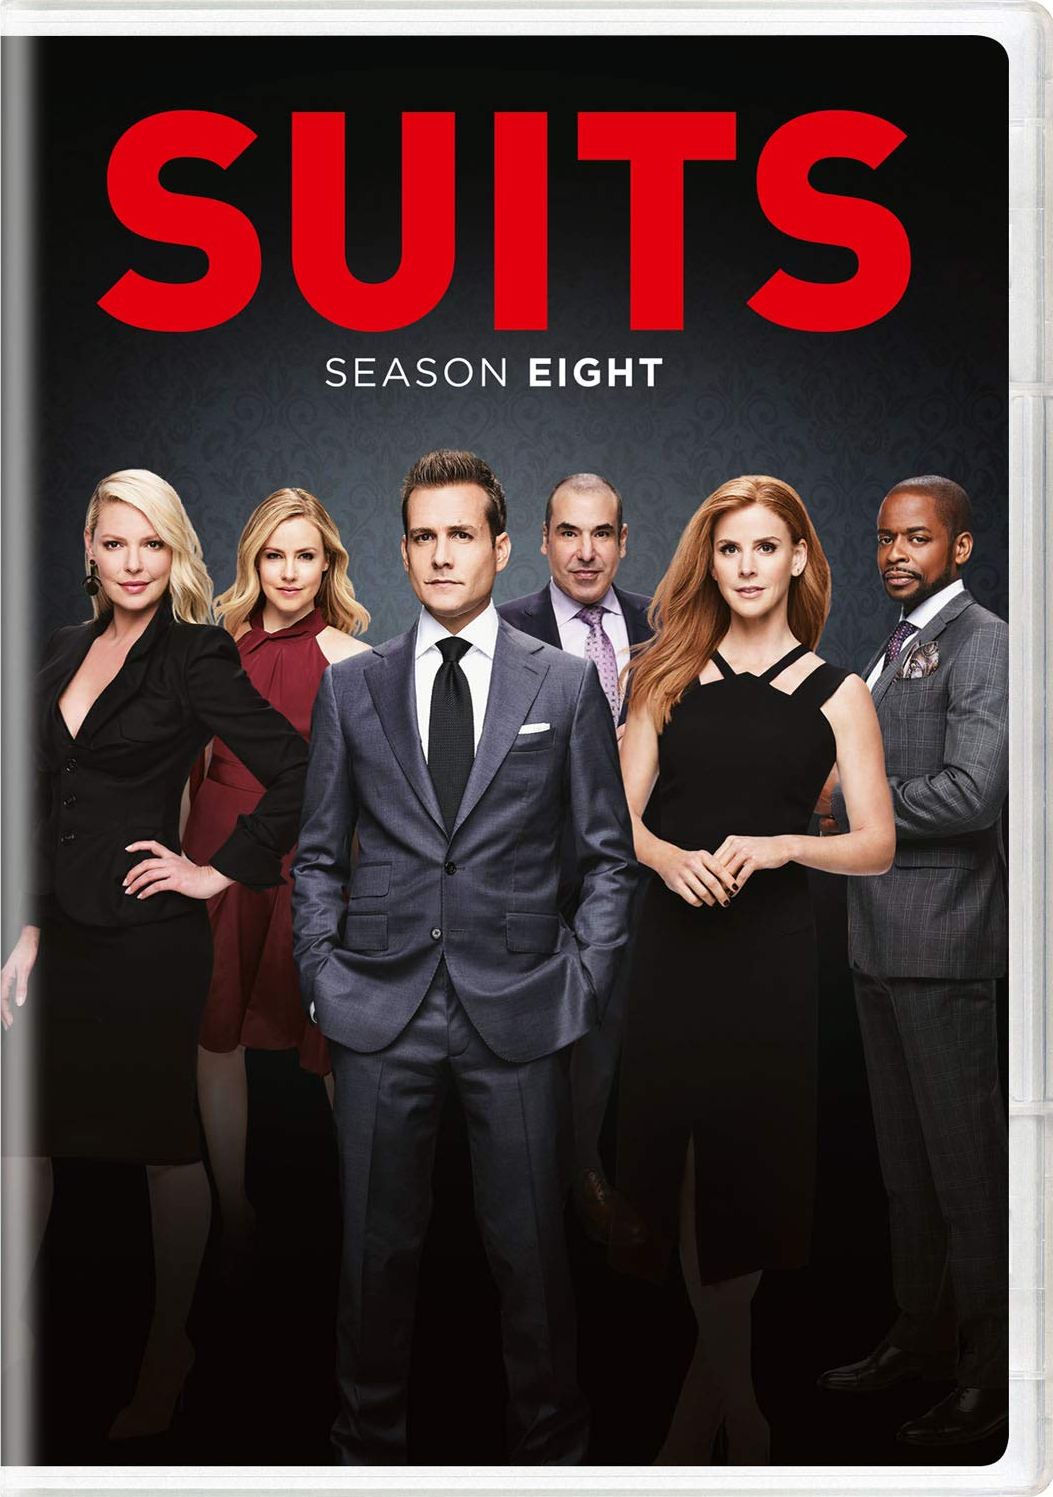 Suits DVD Release Date